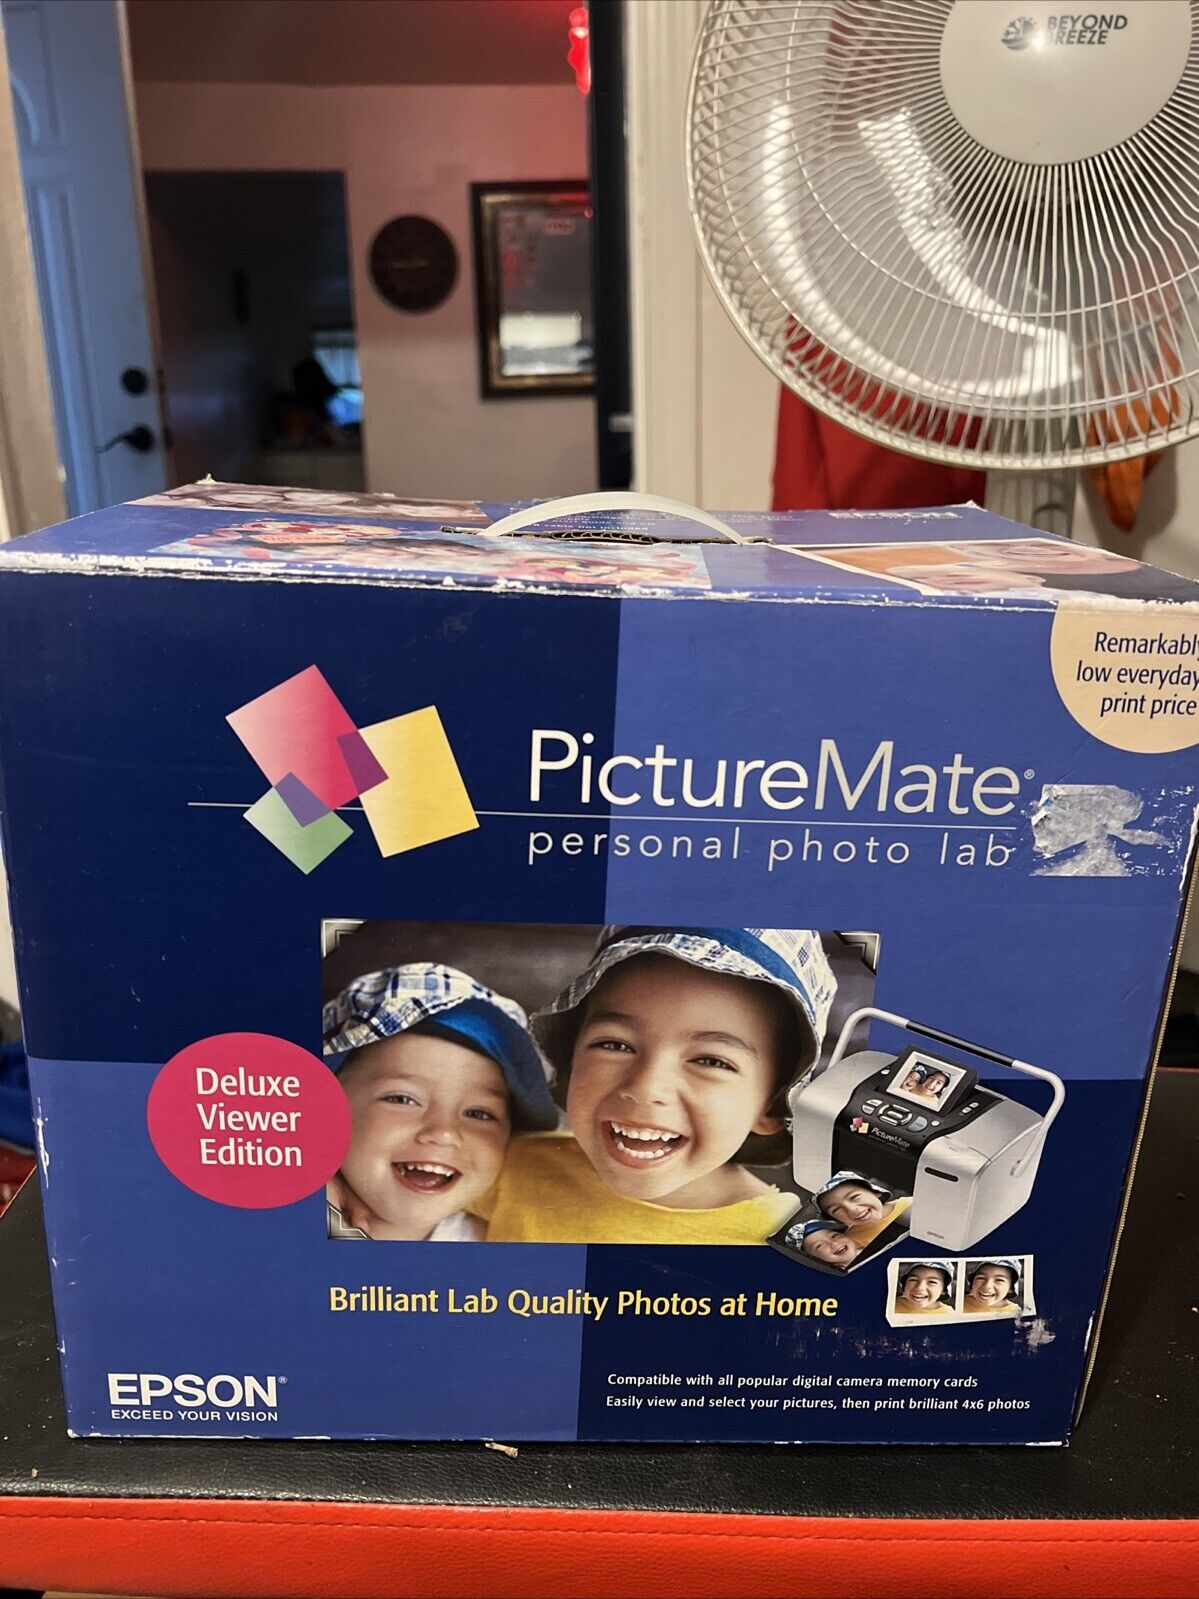 NEW Epson PictureMate Deluxe Bluetooth Viewer Edition Compact Photo Printer USB